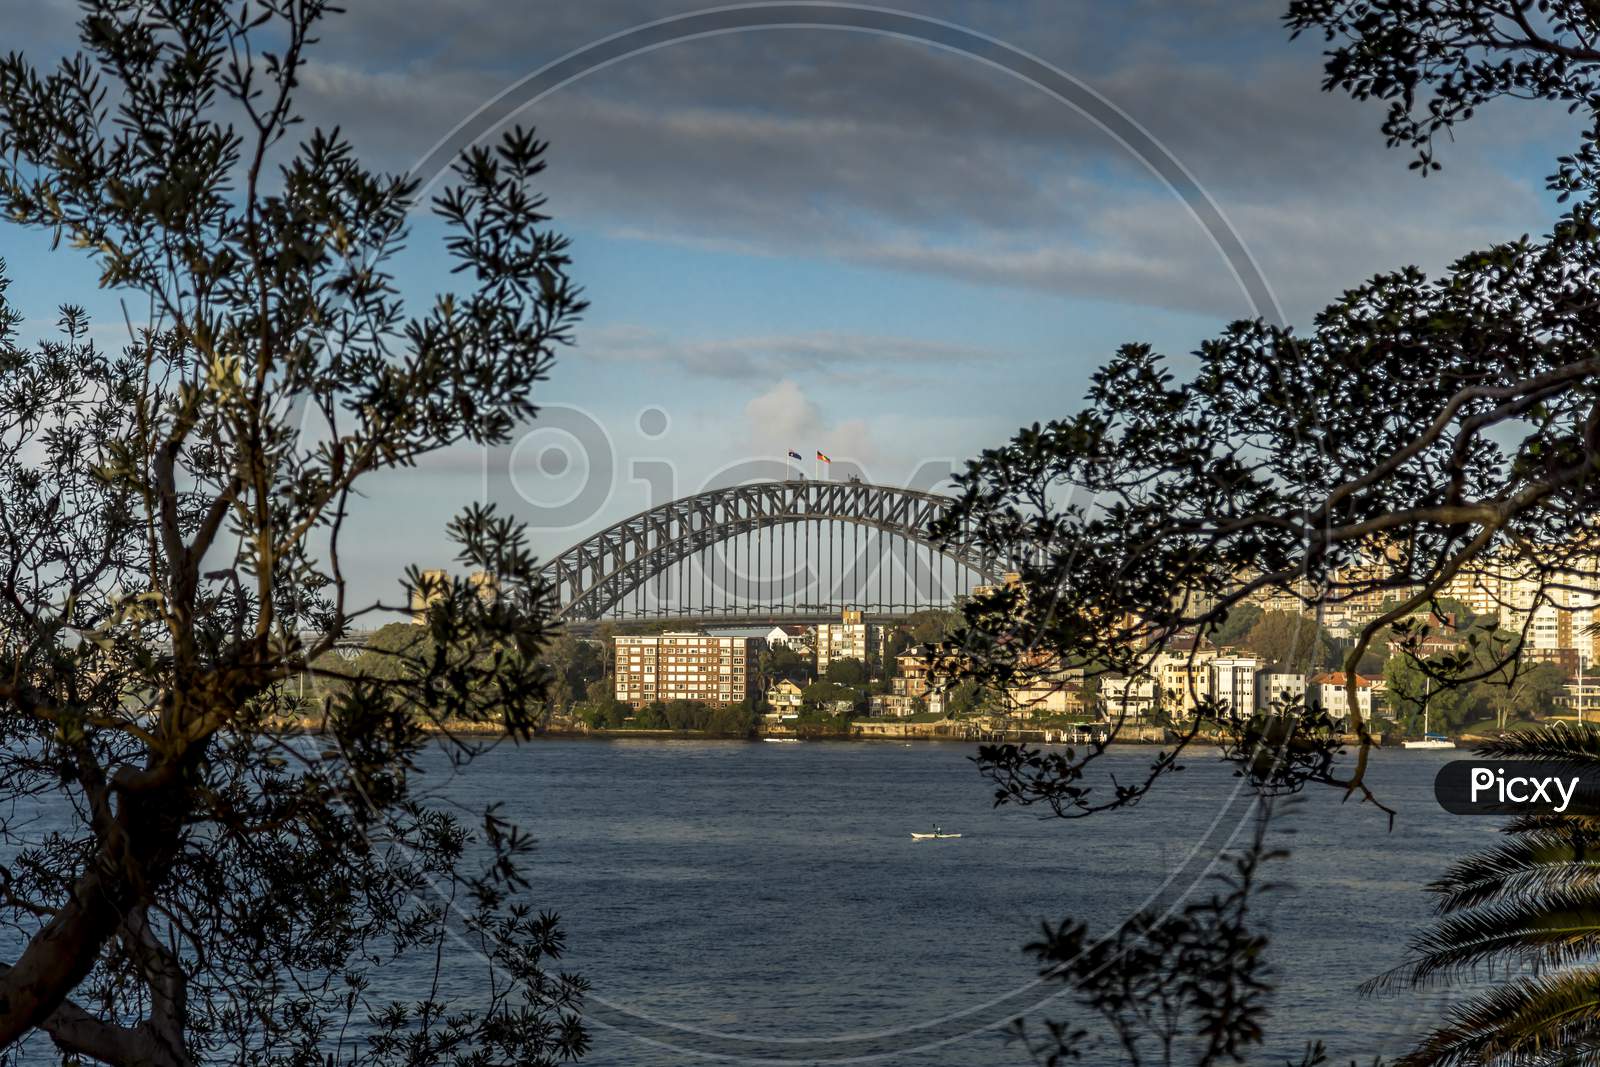 Sydney in Australia, taking pictures of the skyline with the Harbour Bridge during a cloudy but warm day.